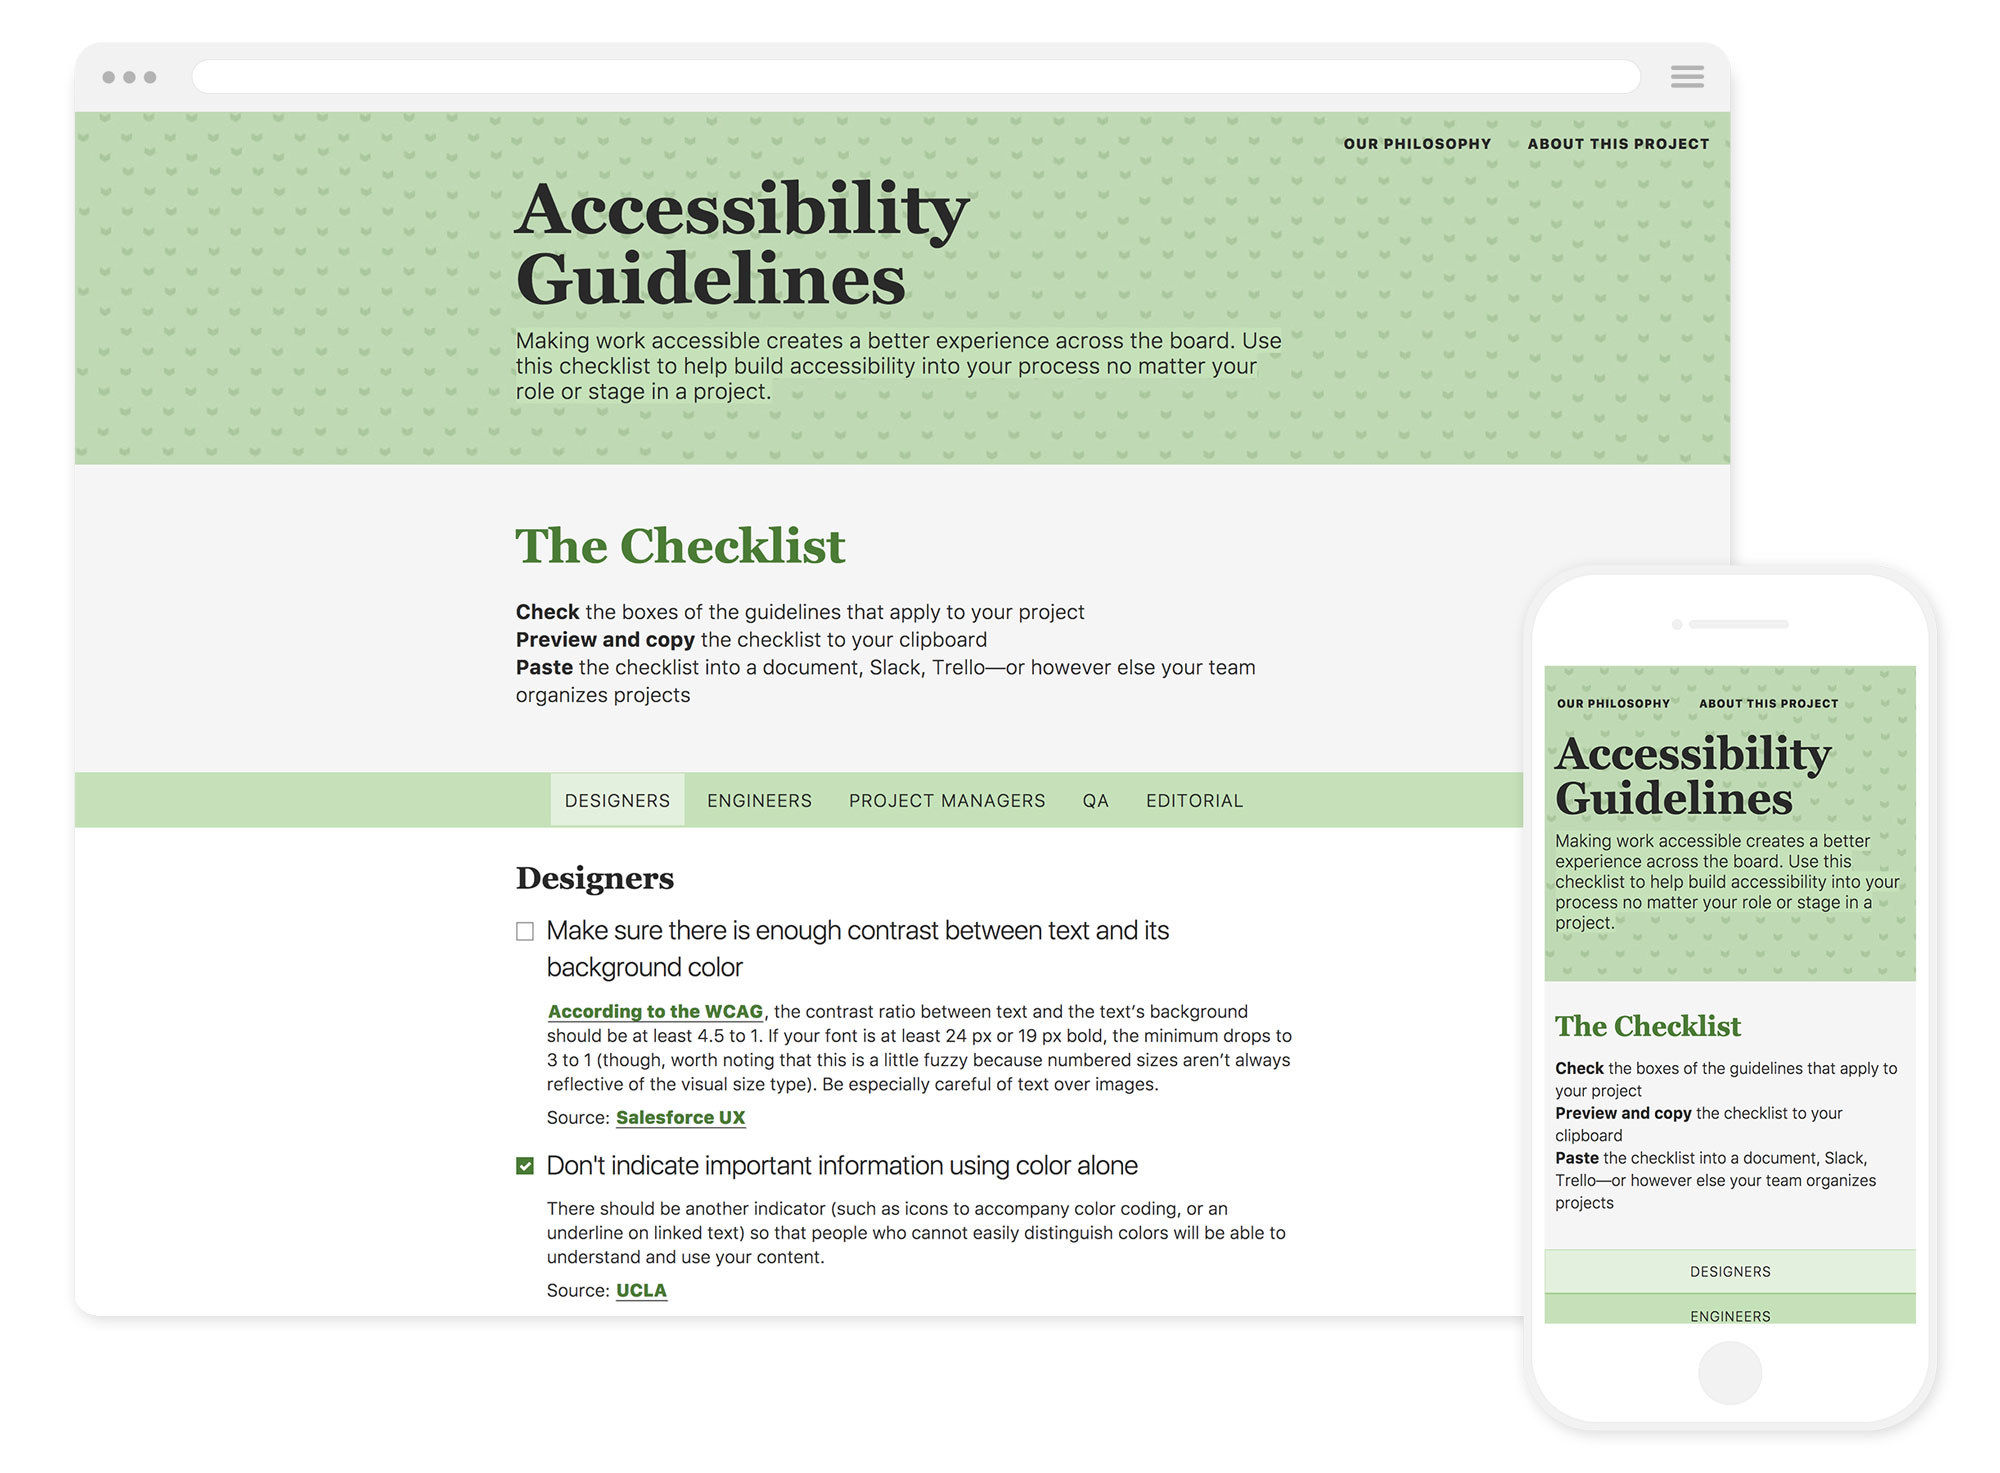 Image of the Accessibility Guidelines website